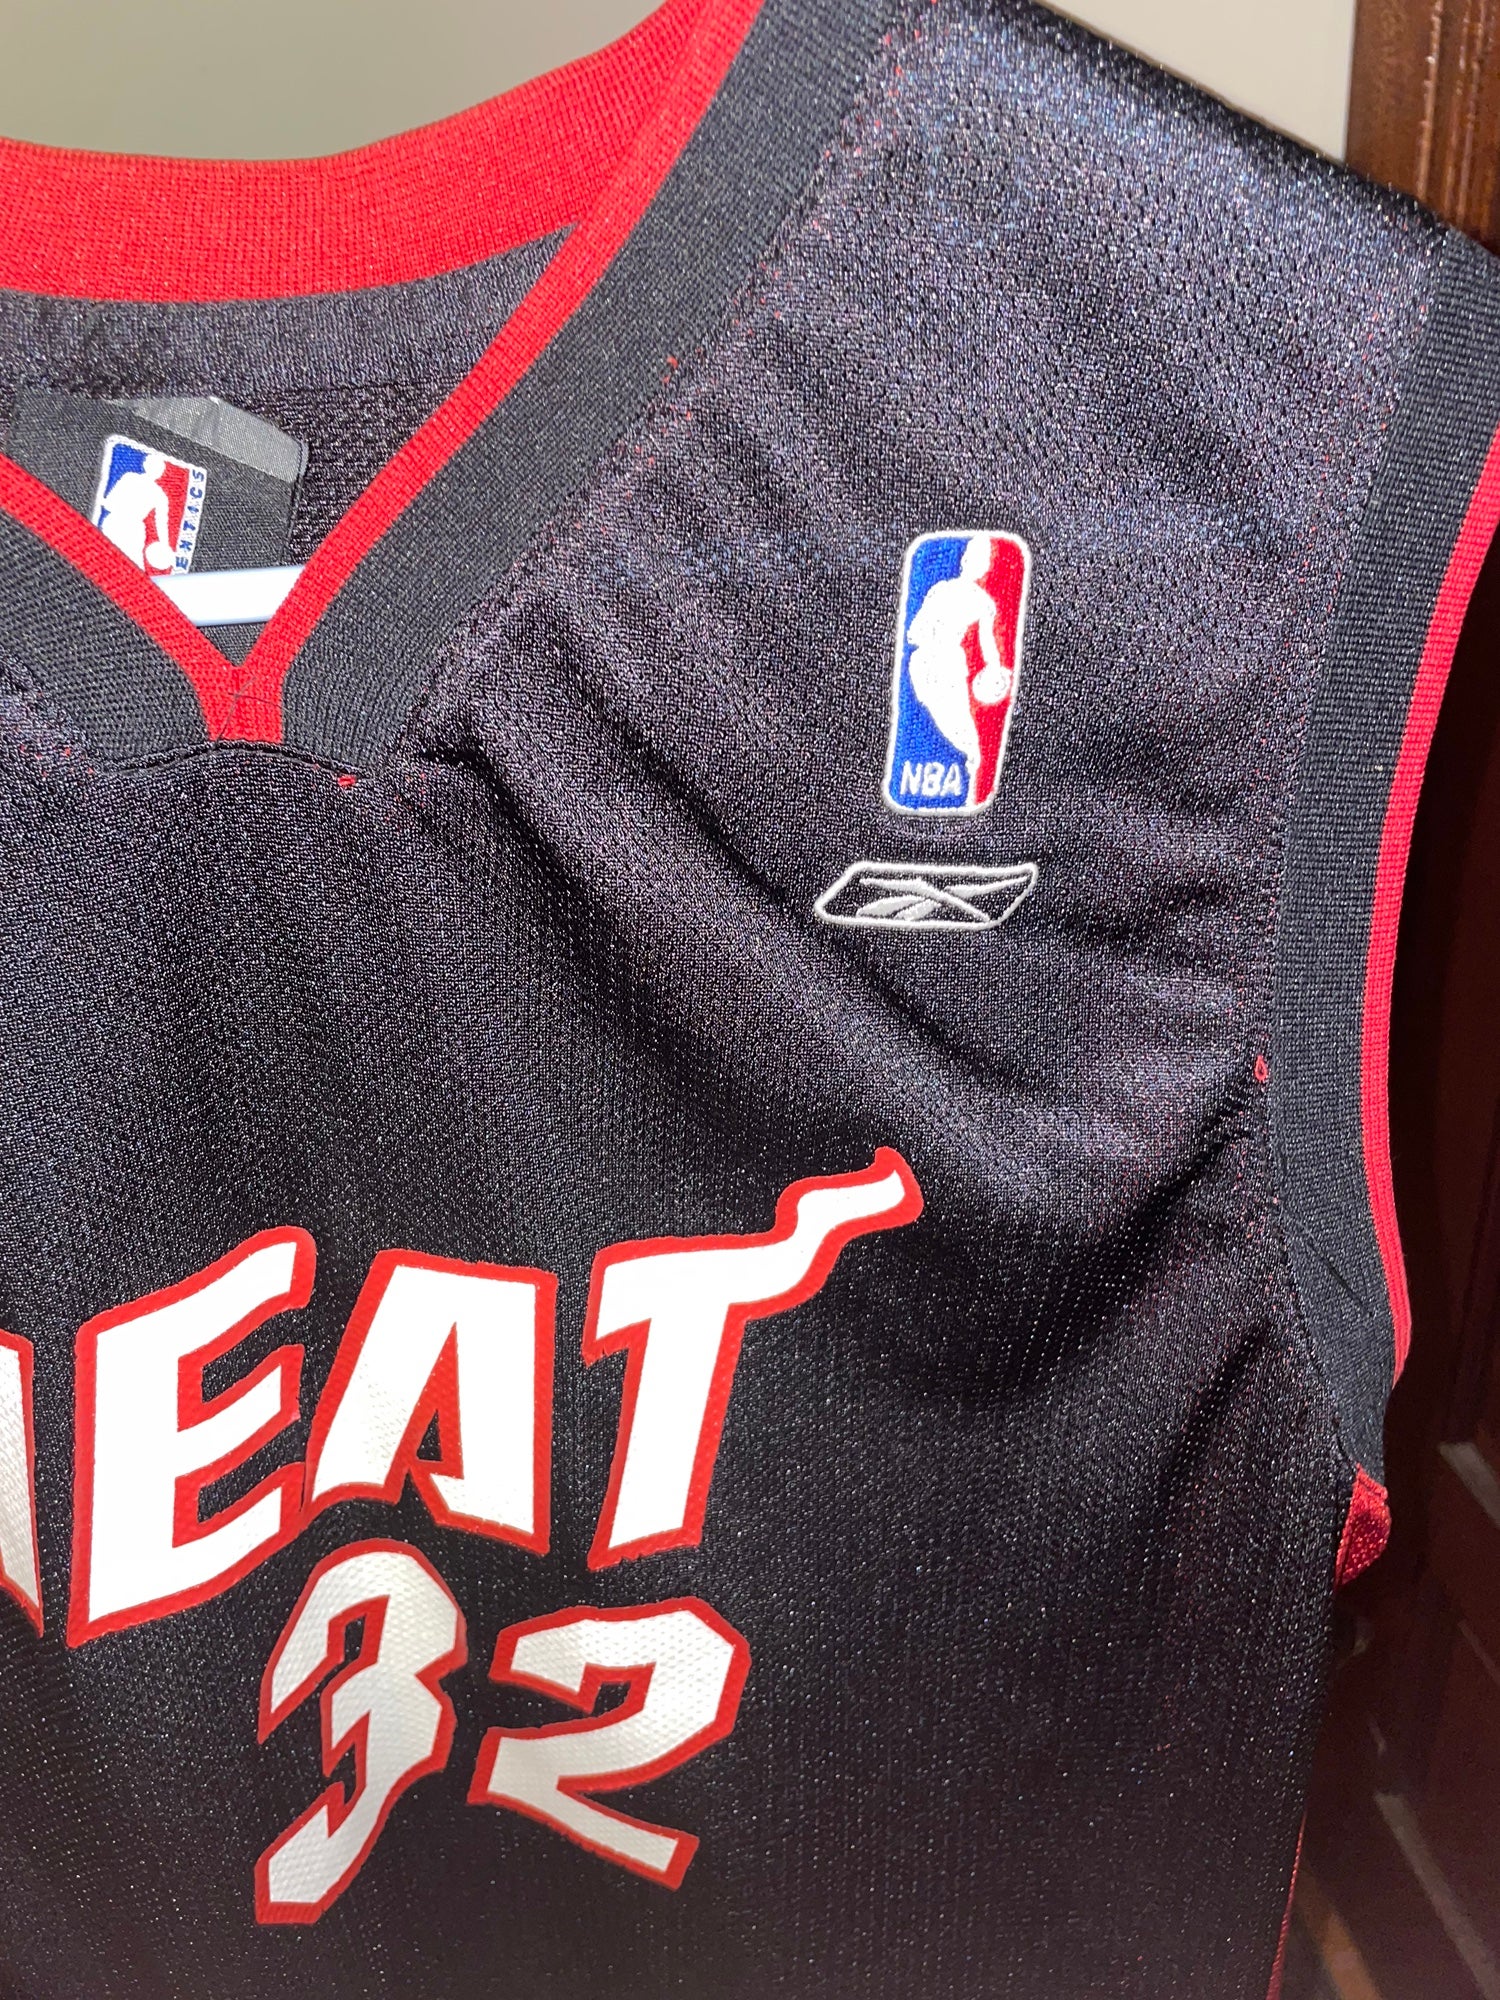 NBA - Shaquille O' Neal's #32 goes into the Miami Heat